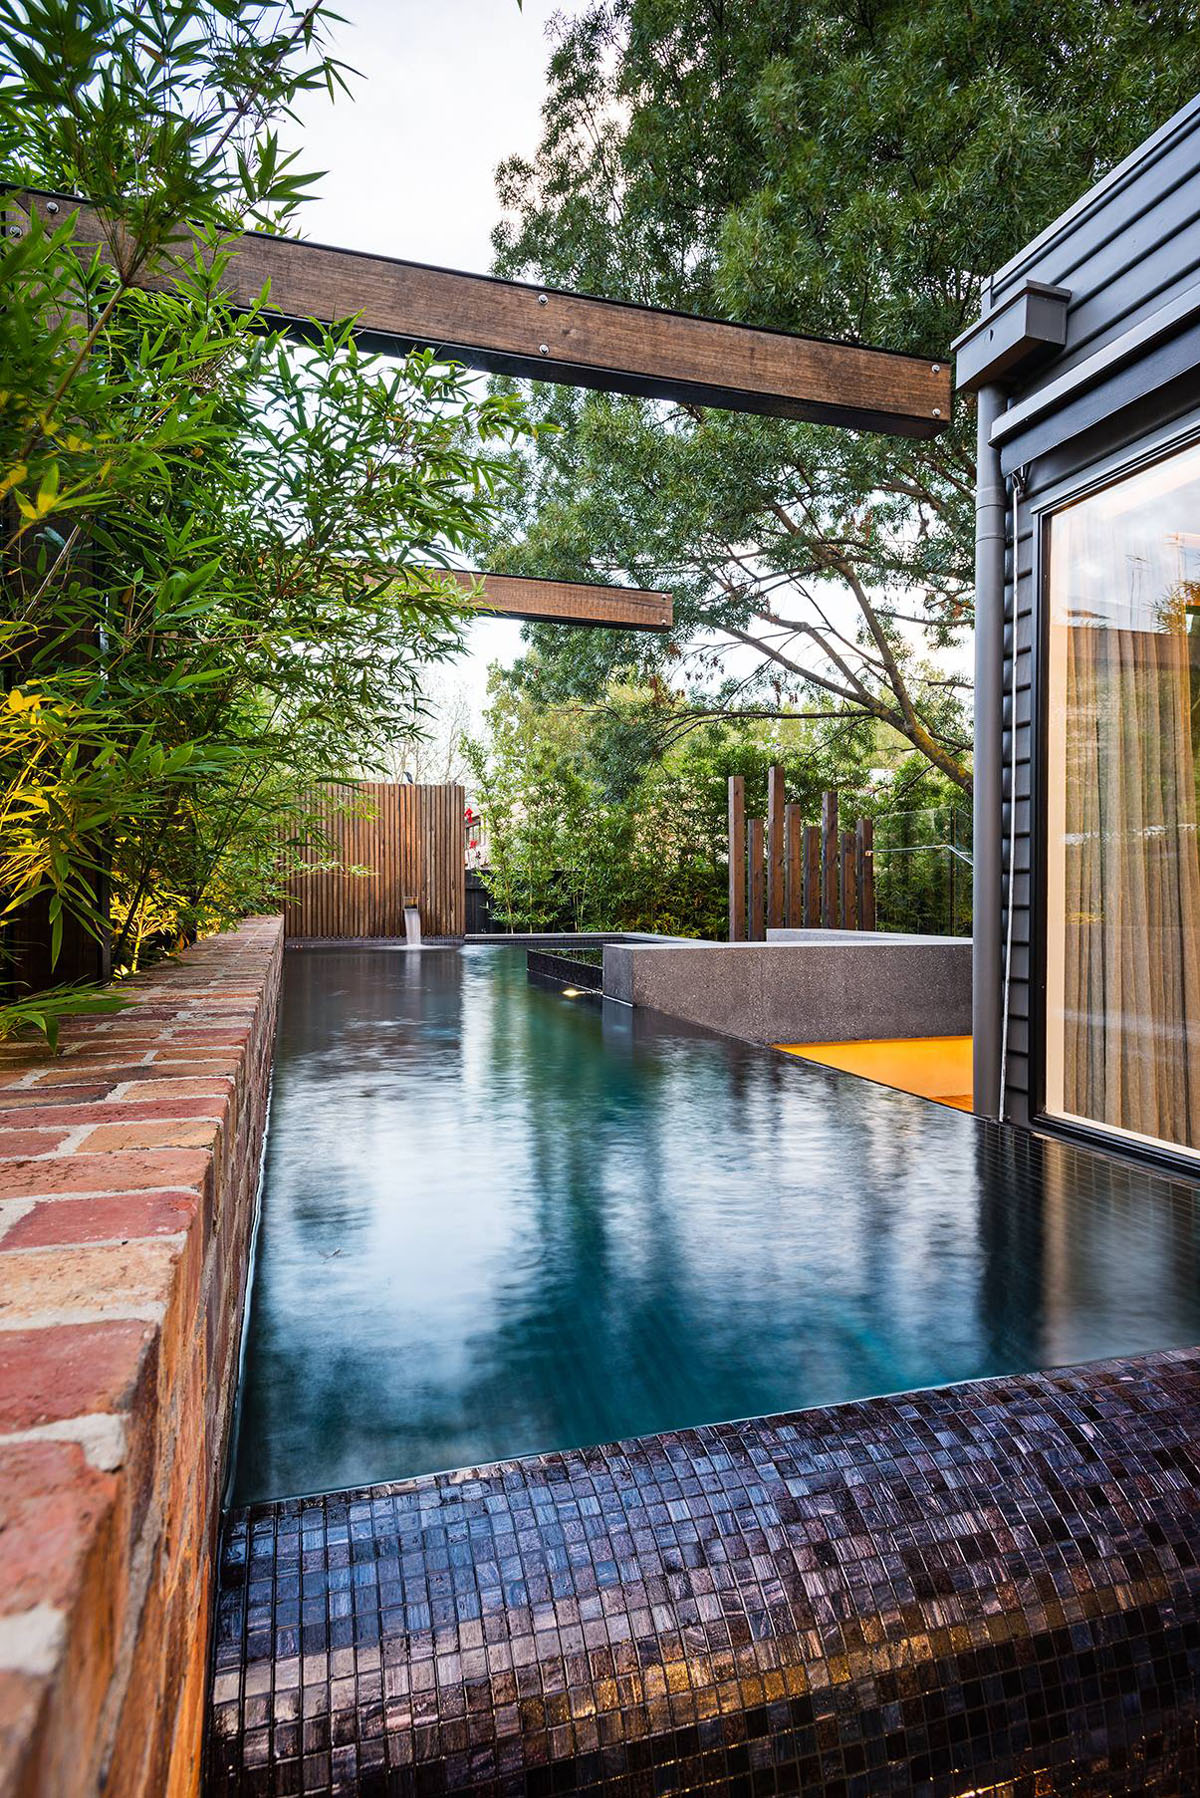 Naroon Modern Design Enchanting Maroon Modern Backyard Project Design With Swimming Pool With Glass Tile Liner With Bamboo Trees Decoration Beautiful Modern Backyard Ideas To Relax You At Charming Home